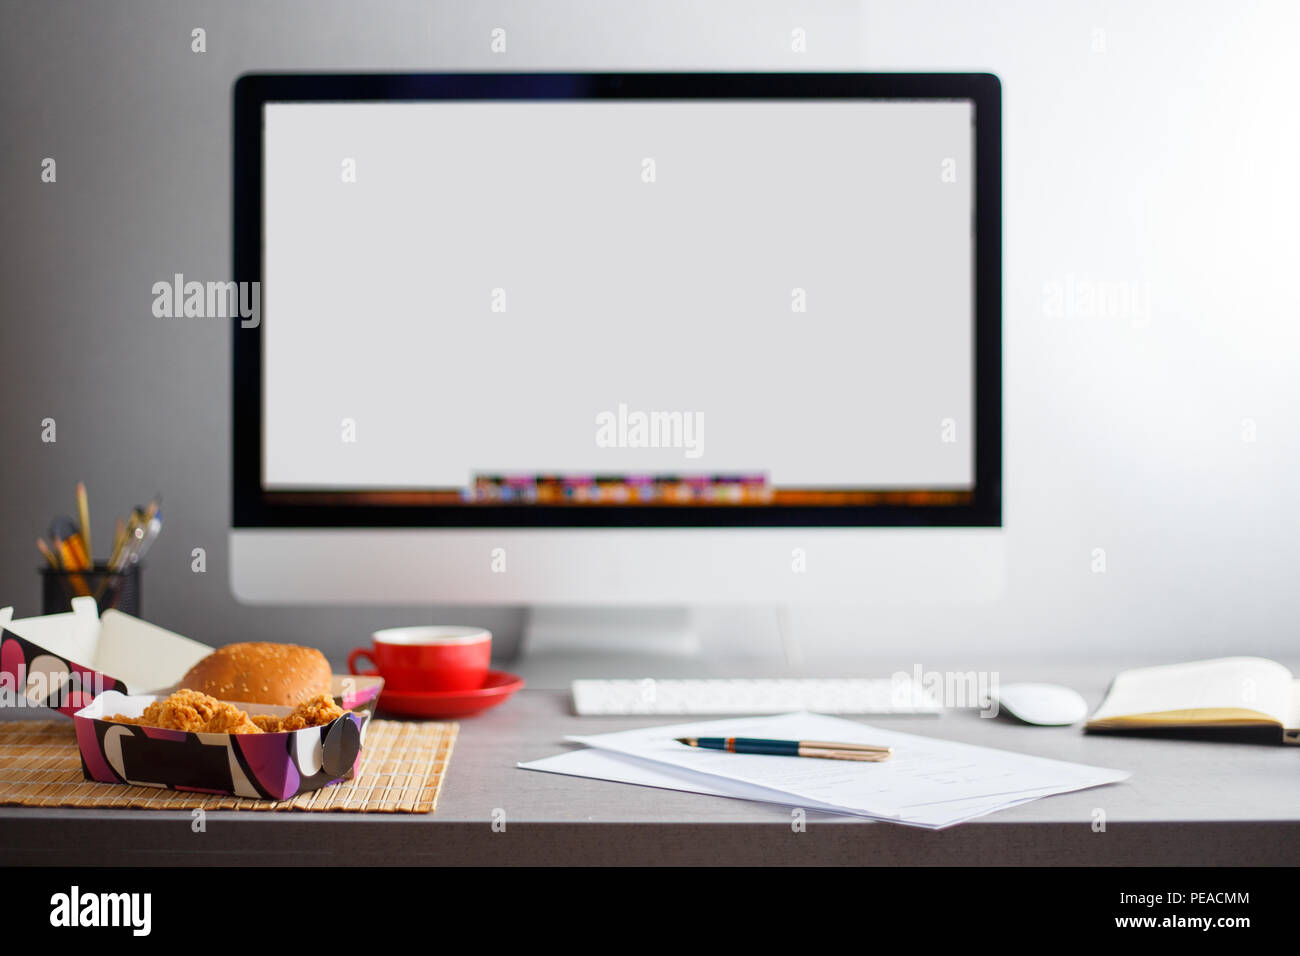 Mock up image of workplace with empty monitor, lunch and papers on the desk Stock Photo